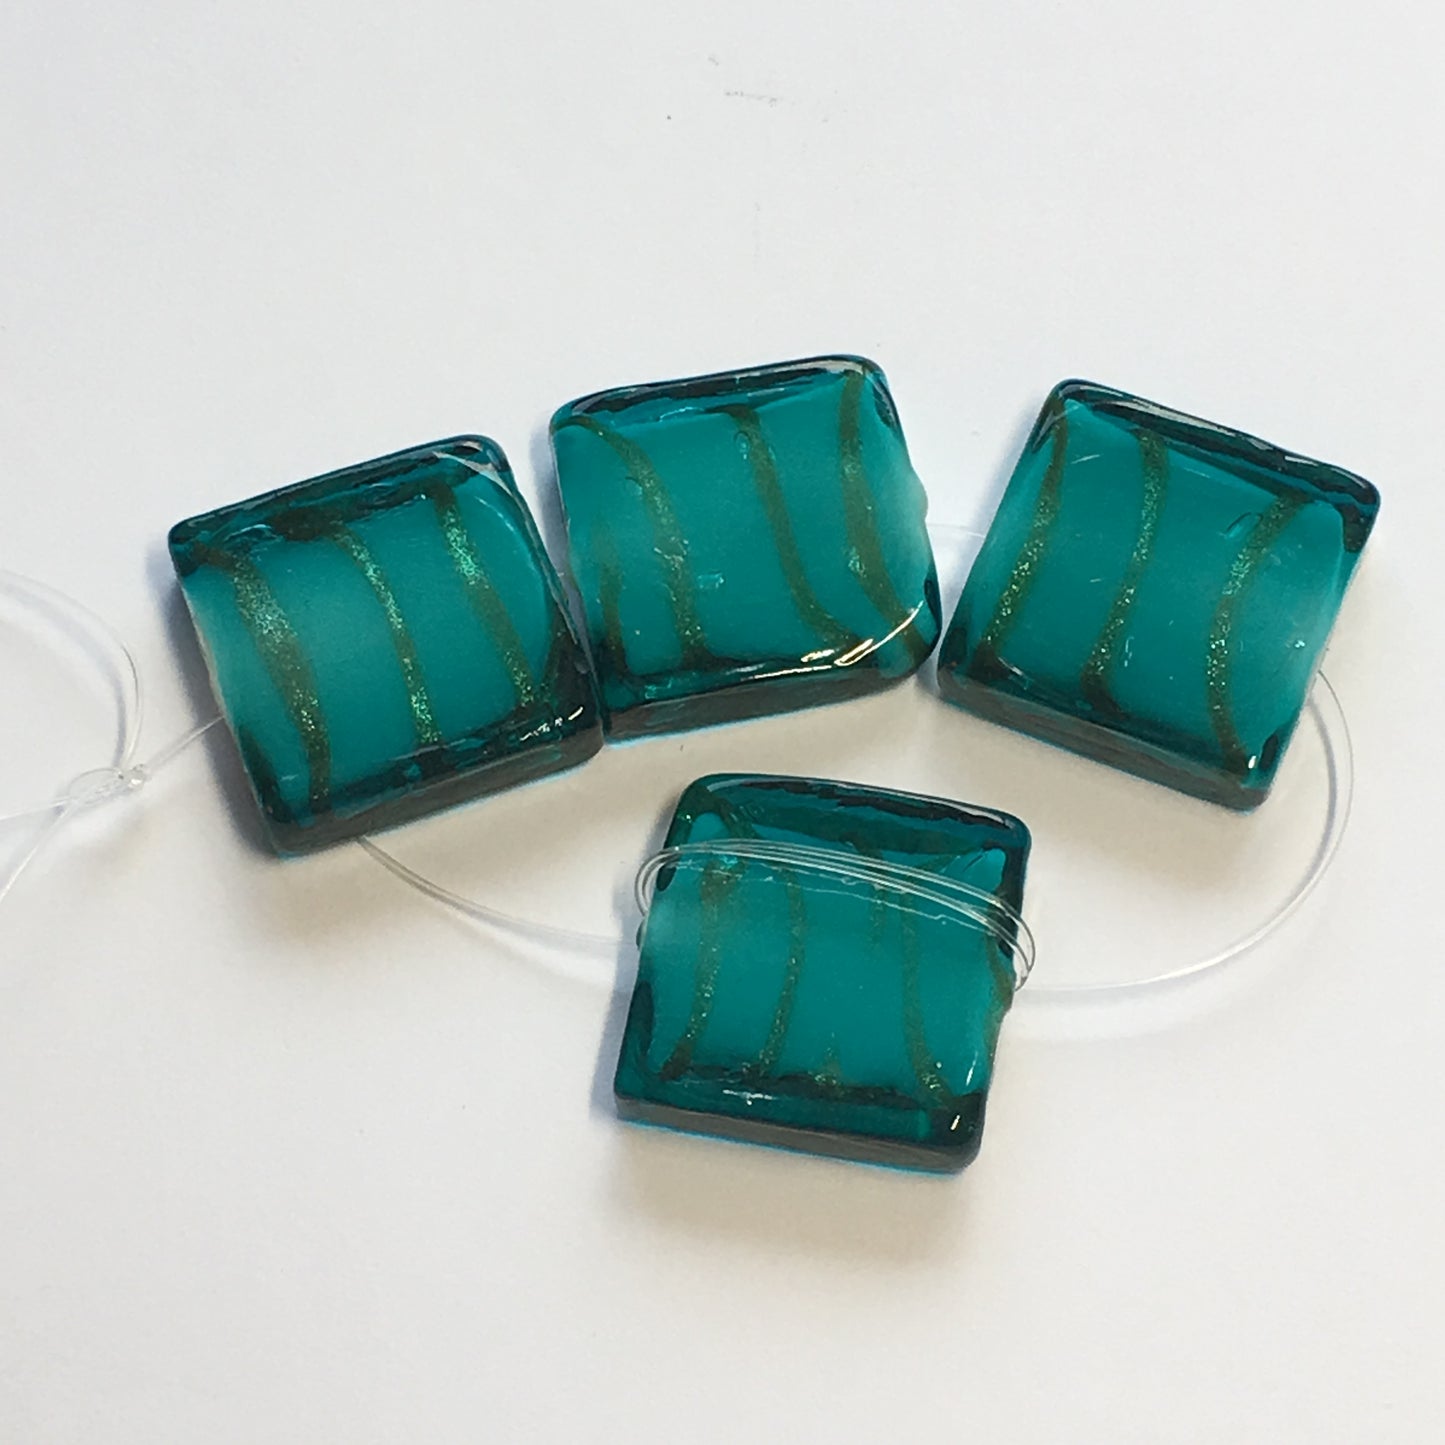 Transparent Turquoise With White Core/Gold Stripes Lampwork Glass Pressed Flat Square Beads, 20 mm - 4 Beads